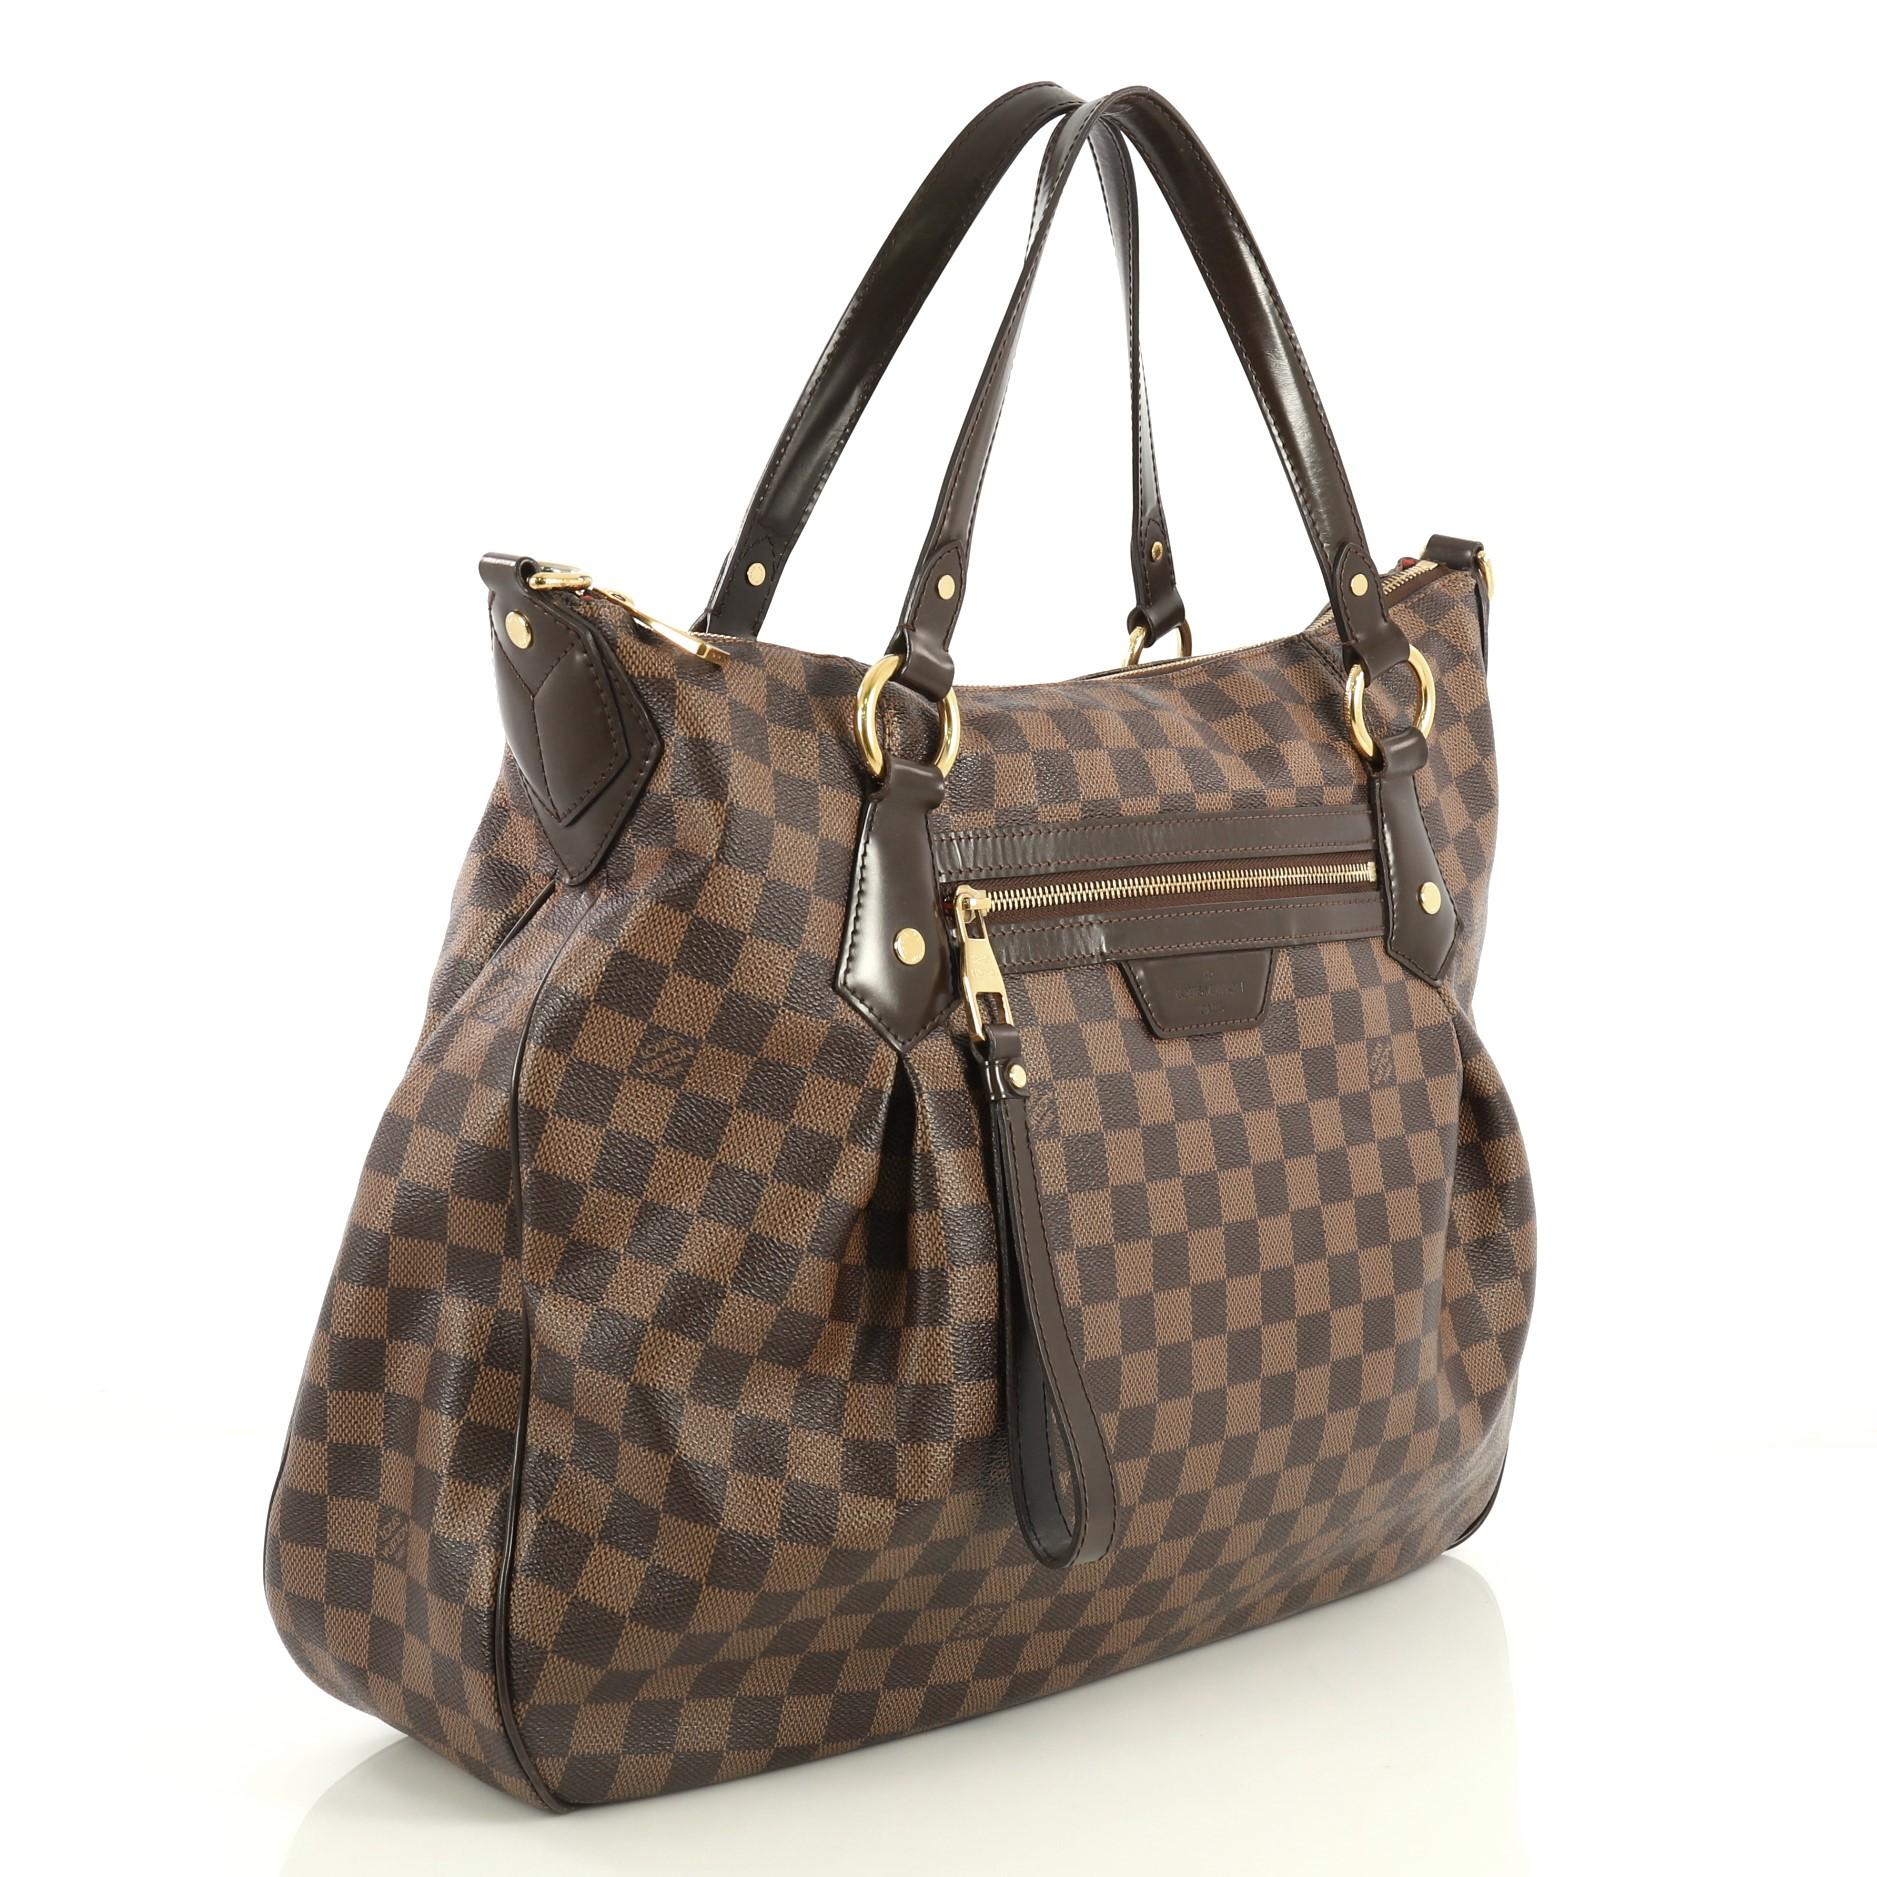 This Louis Vuitton Evora Handbag Damier GM, crafted in damier ebene coated canvas, features vachetta leather strap and trim, pleated silhouette, front zip pocket, and gold-tone hardware. Its zip closure opens to a red microfiber interior with slip